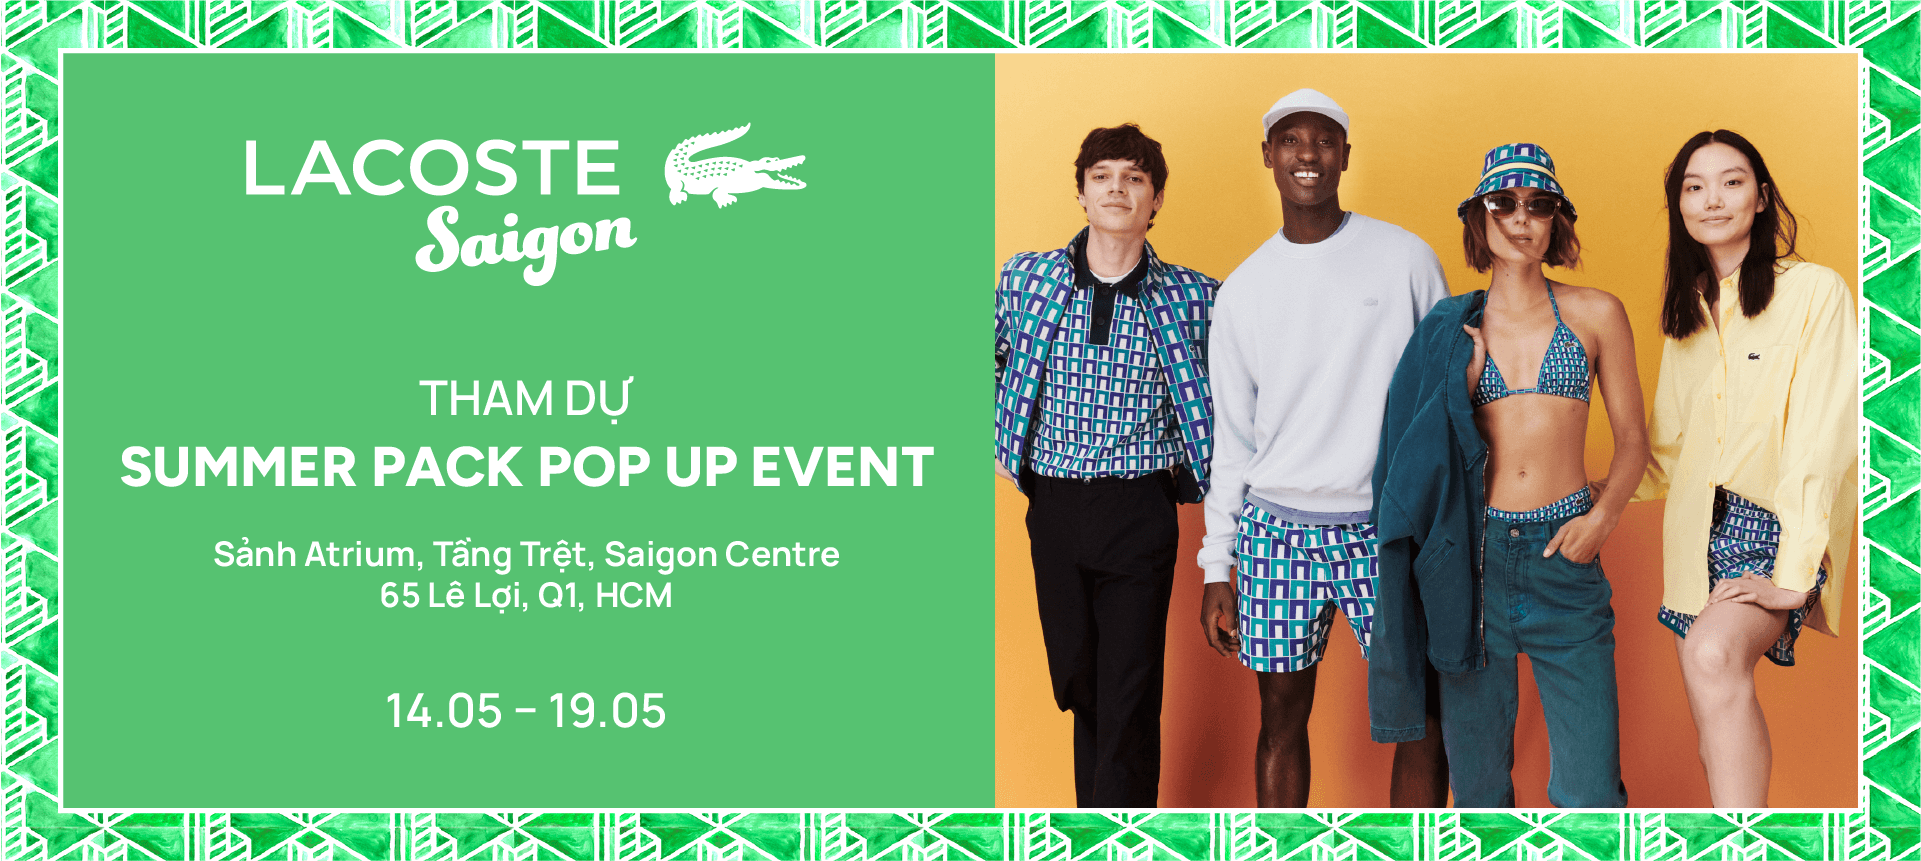 LACOSTE SUMMER PACK POP-UP EVENT